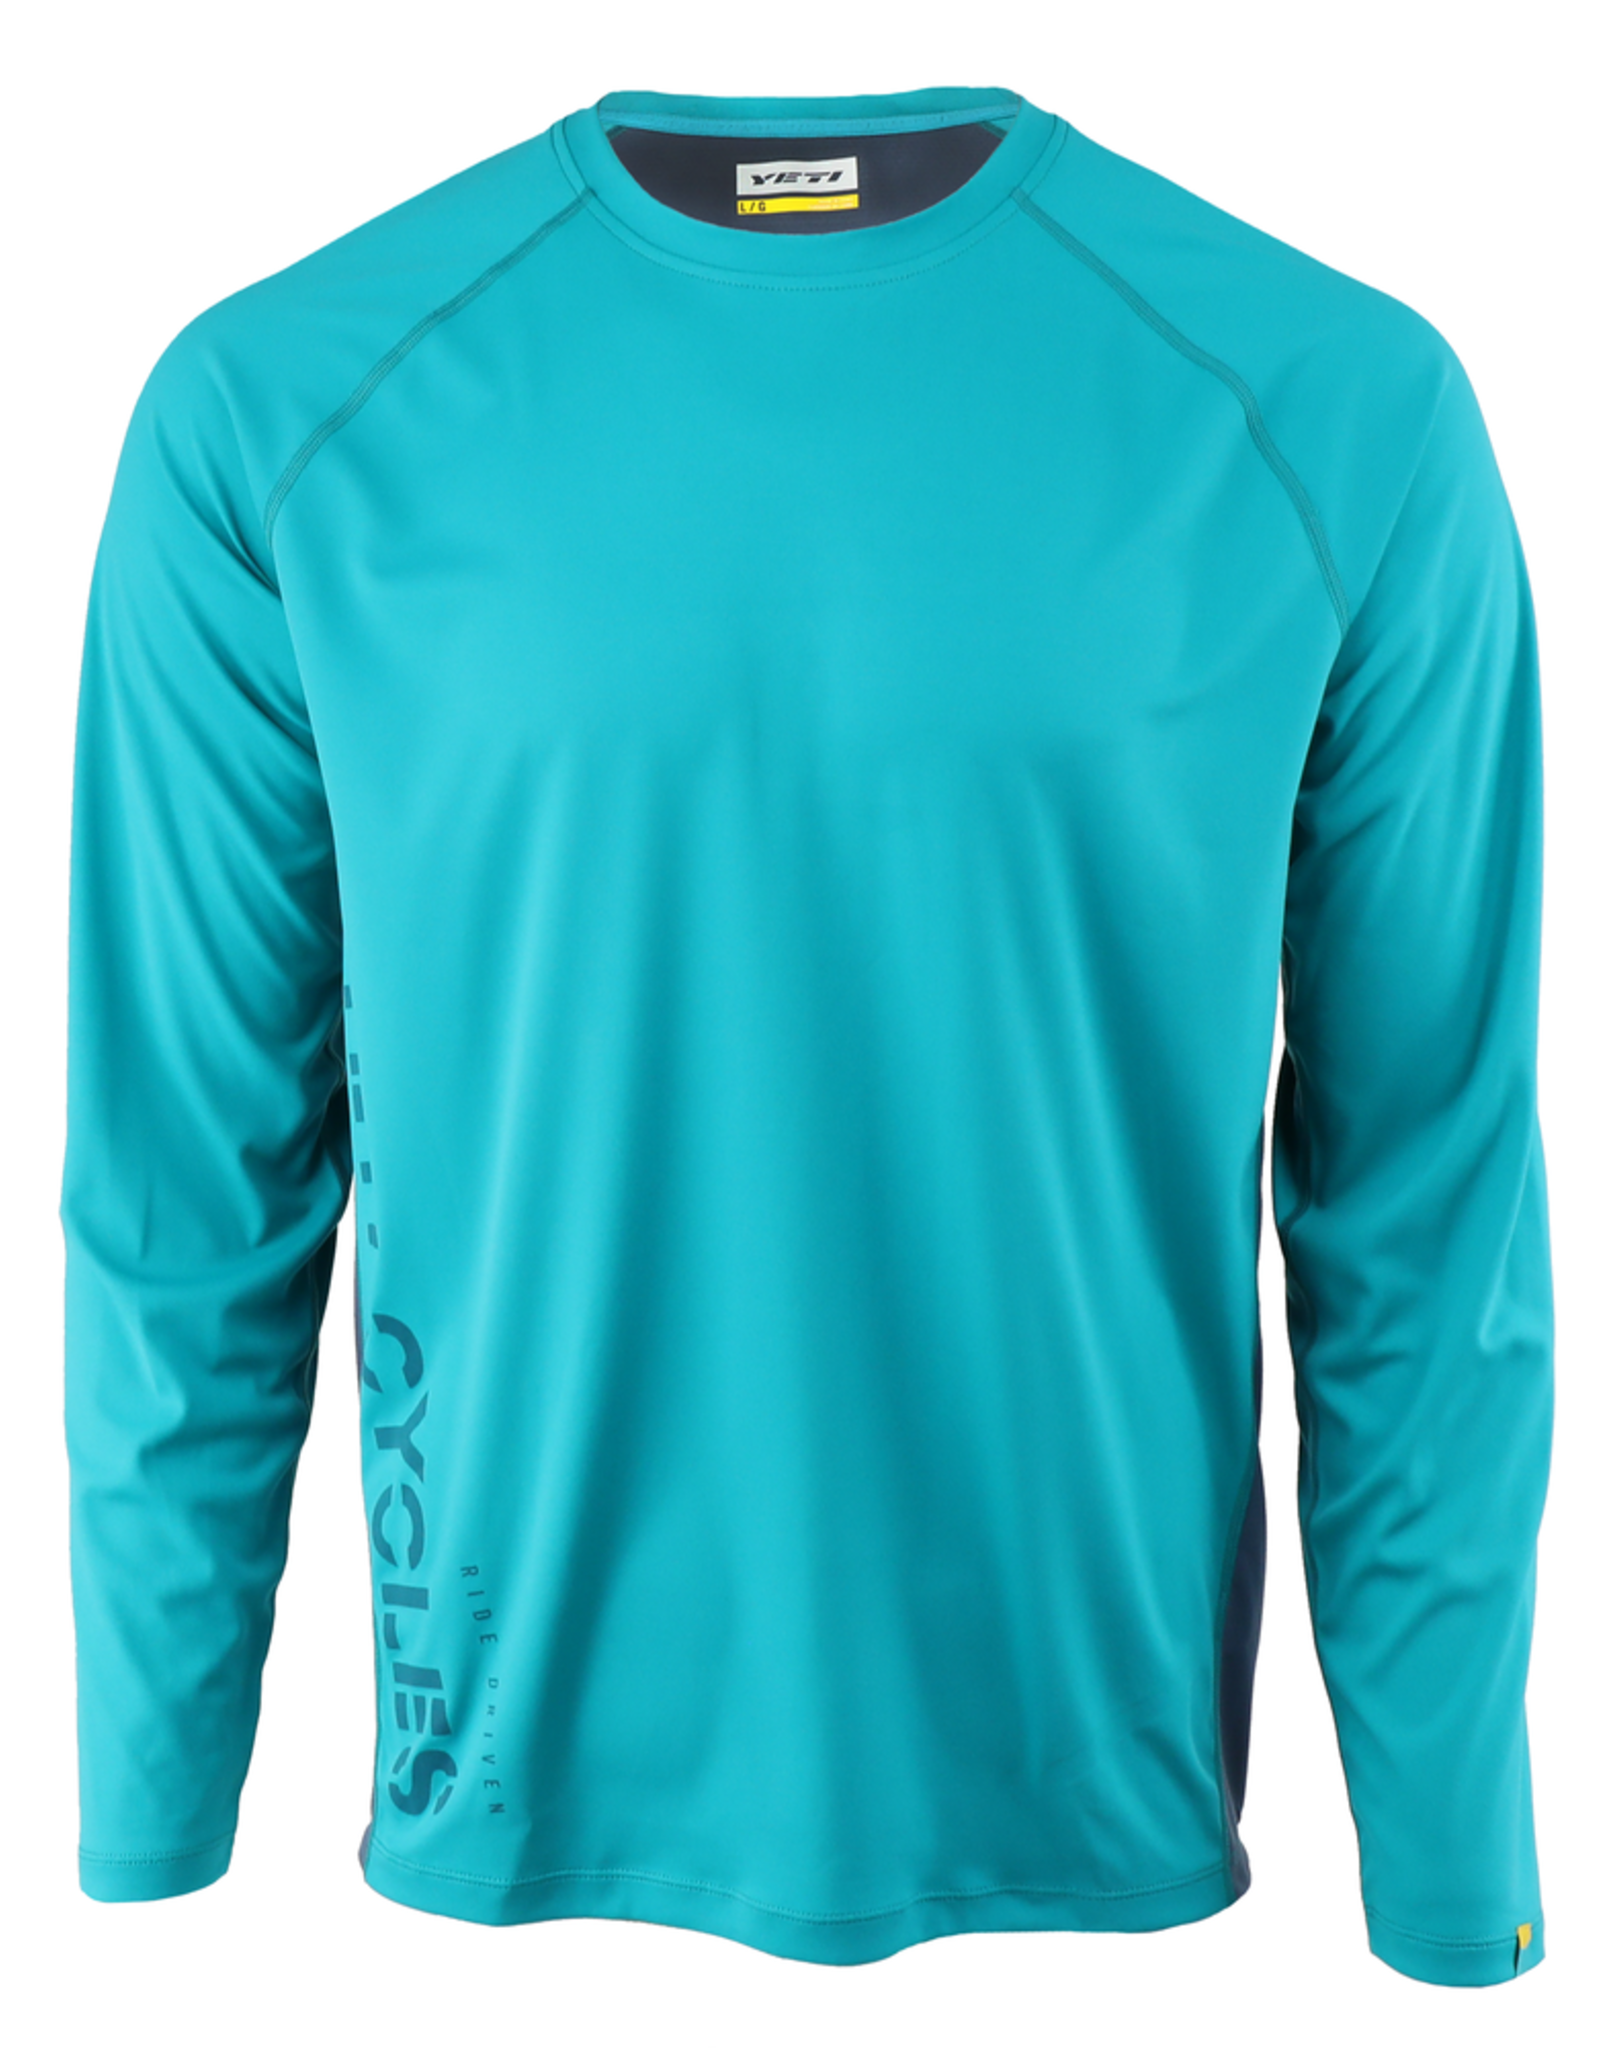 Yeti Cycles TOLLAND L/S JERSEY